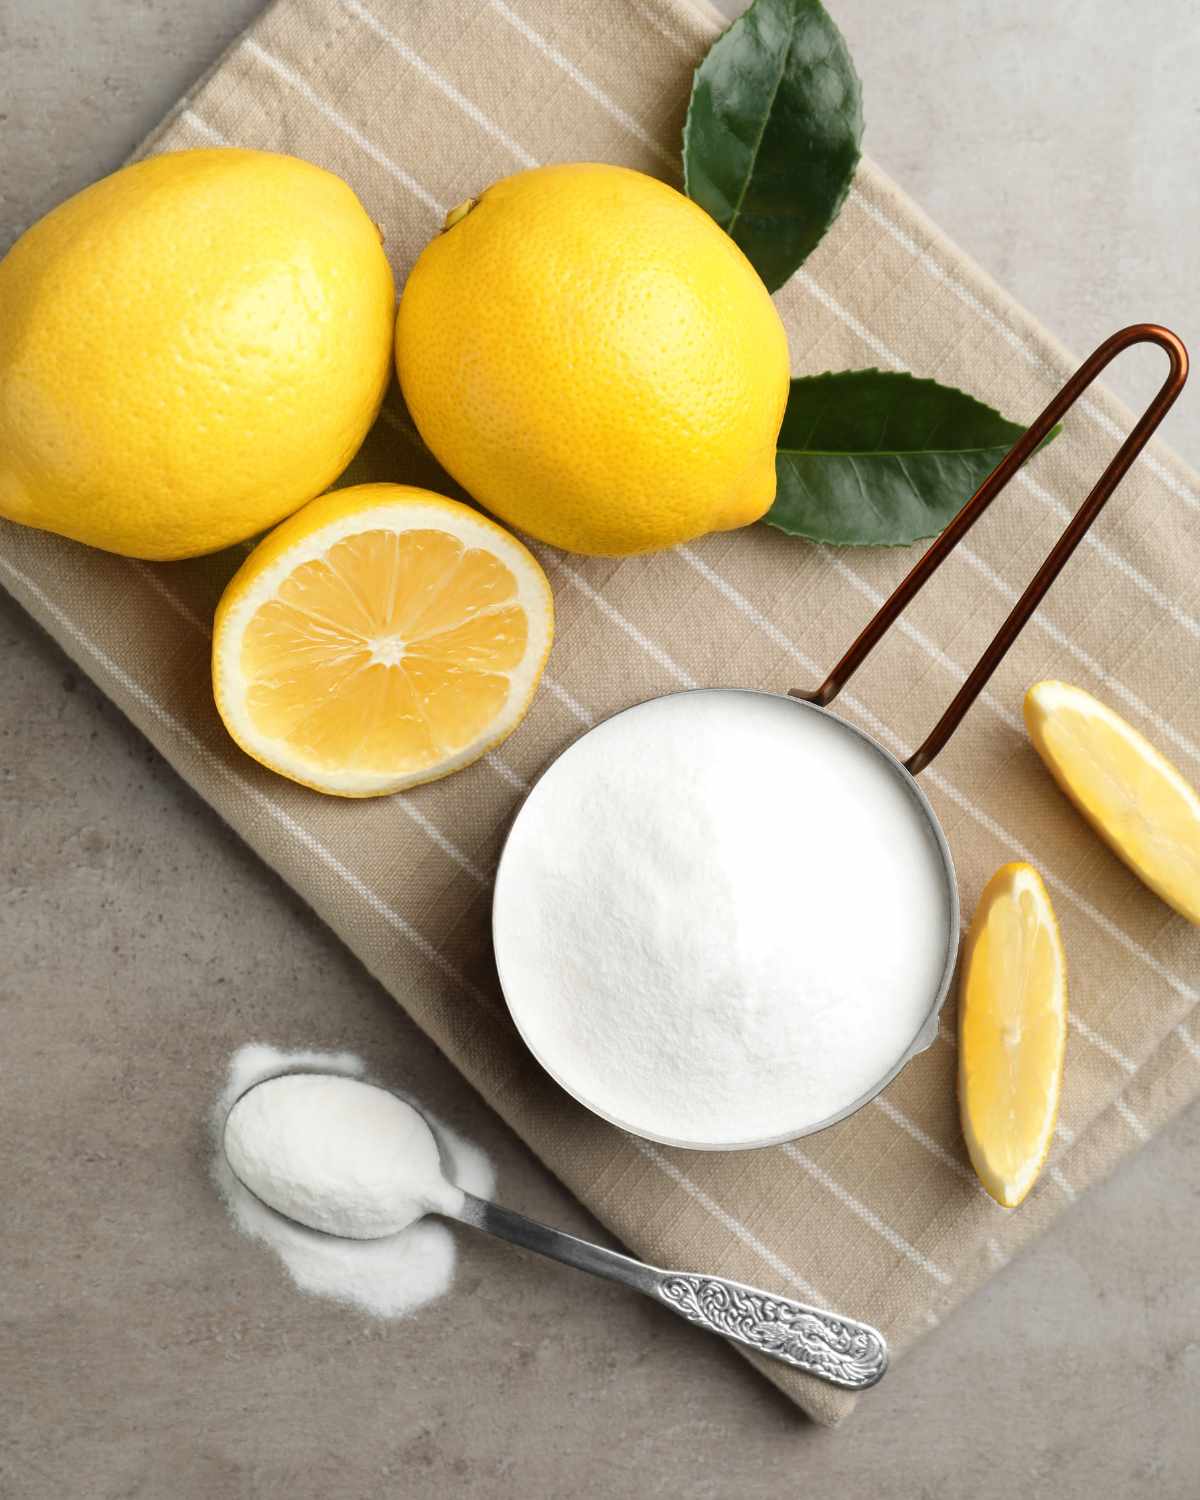 Lemons, baking powder, and a spoon on a cloth.